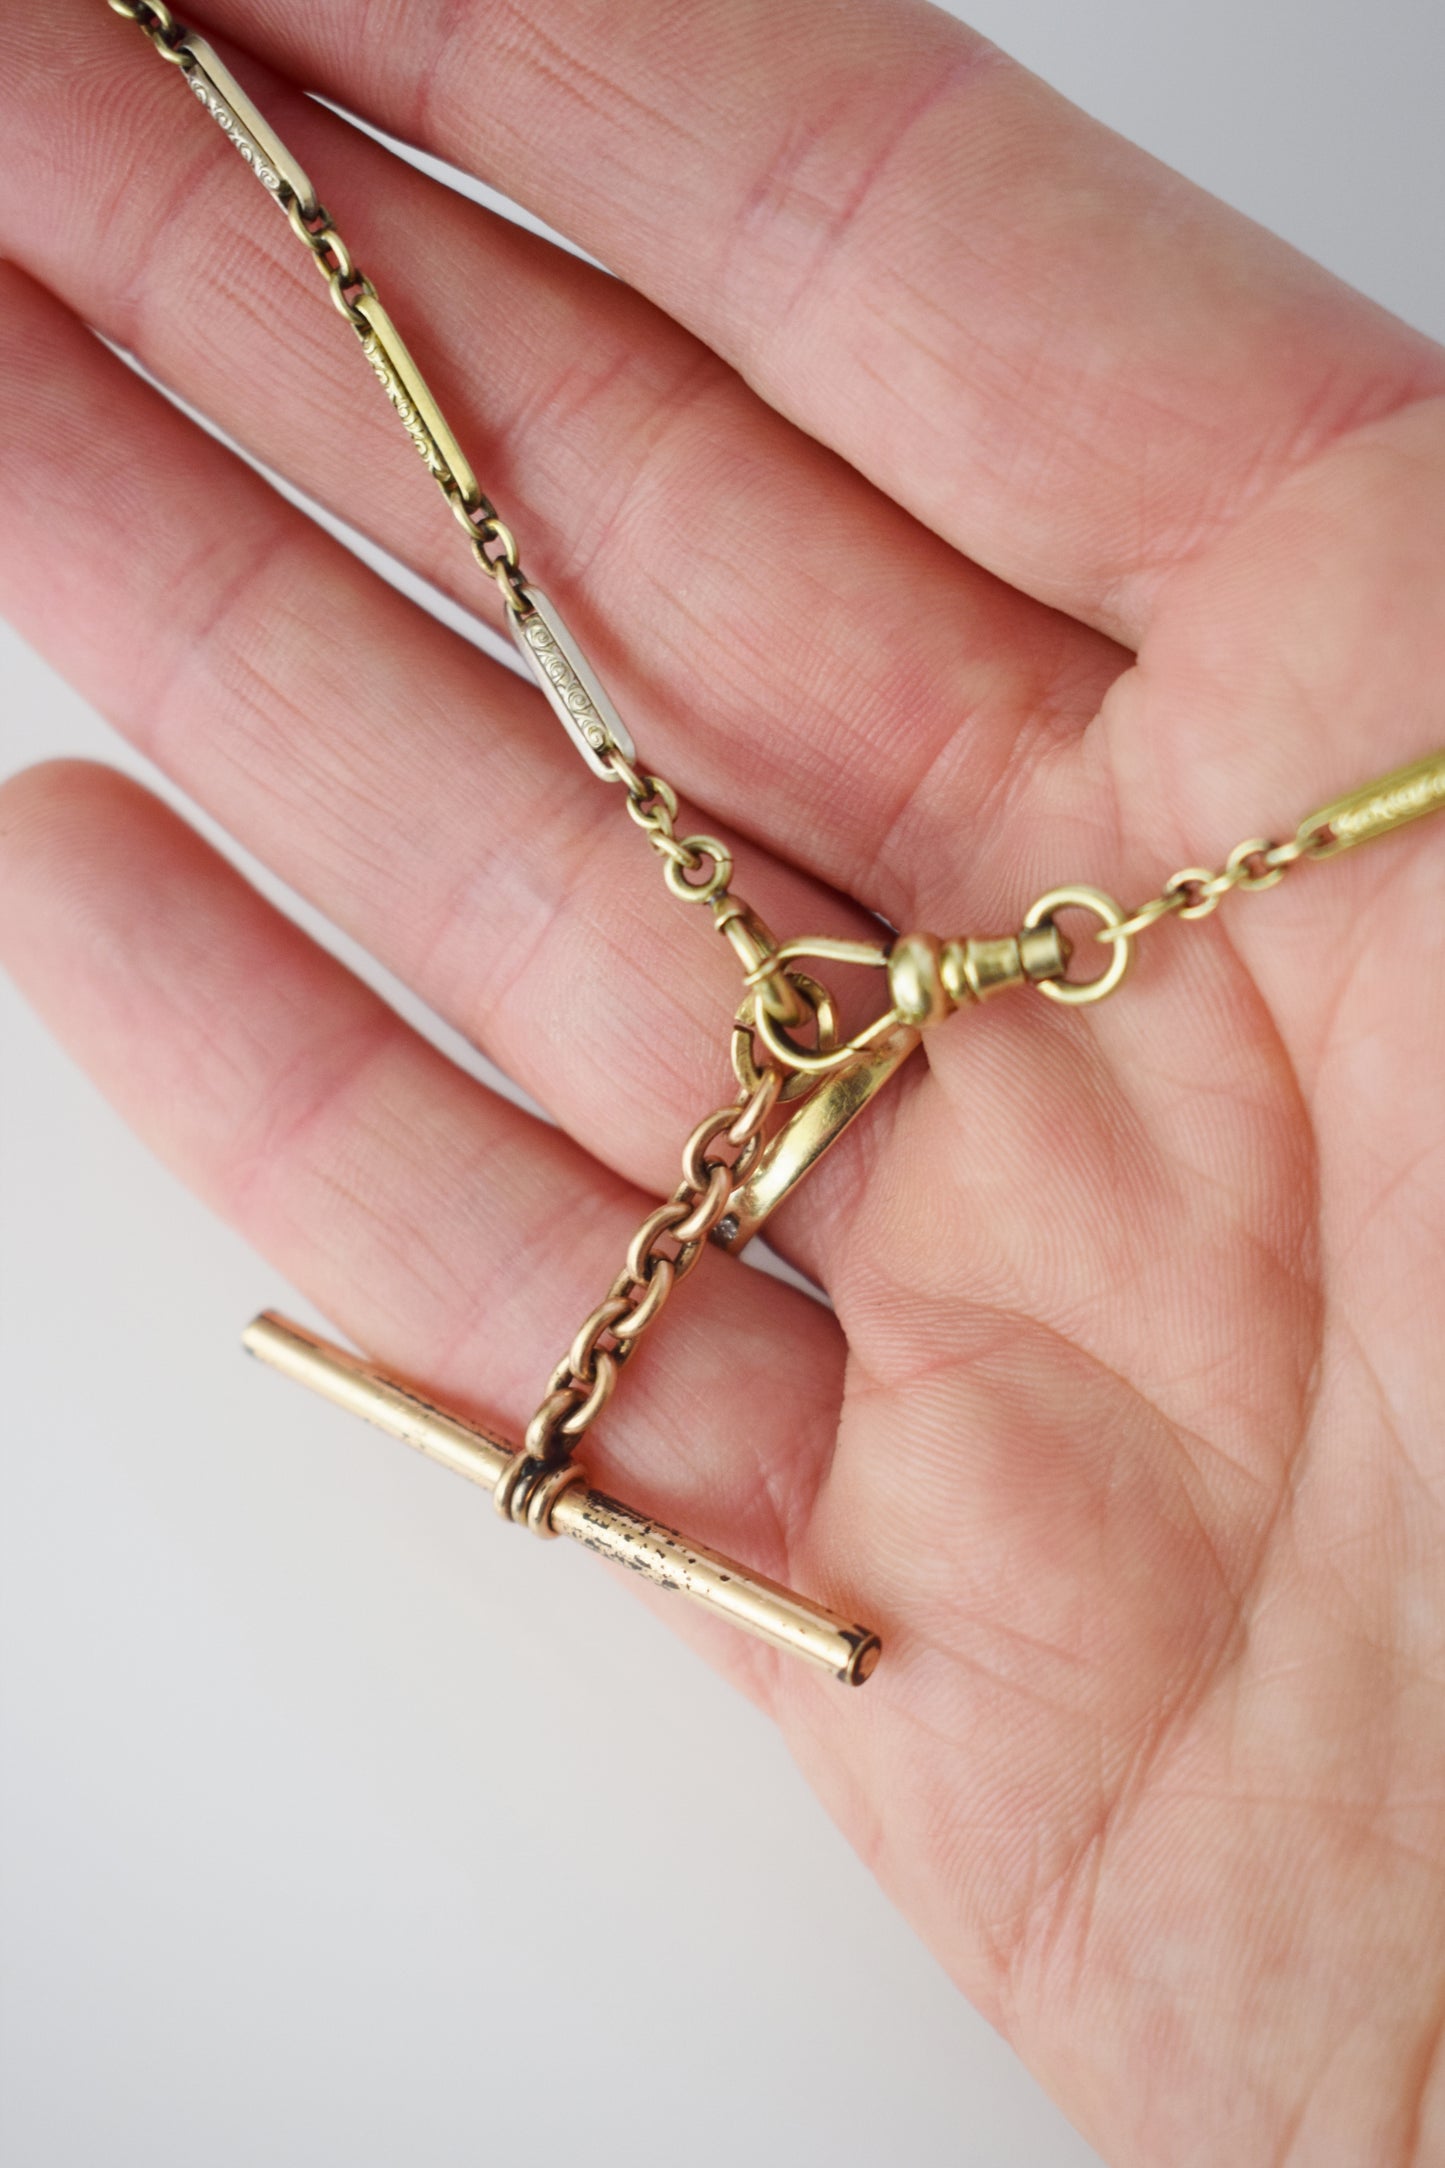 Antique 14kt Gold-fill Fob Chain Necklace with T Bar